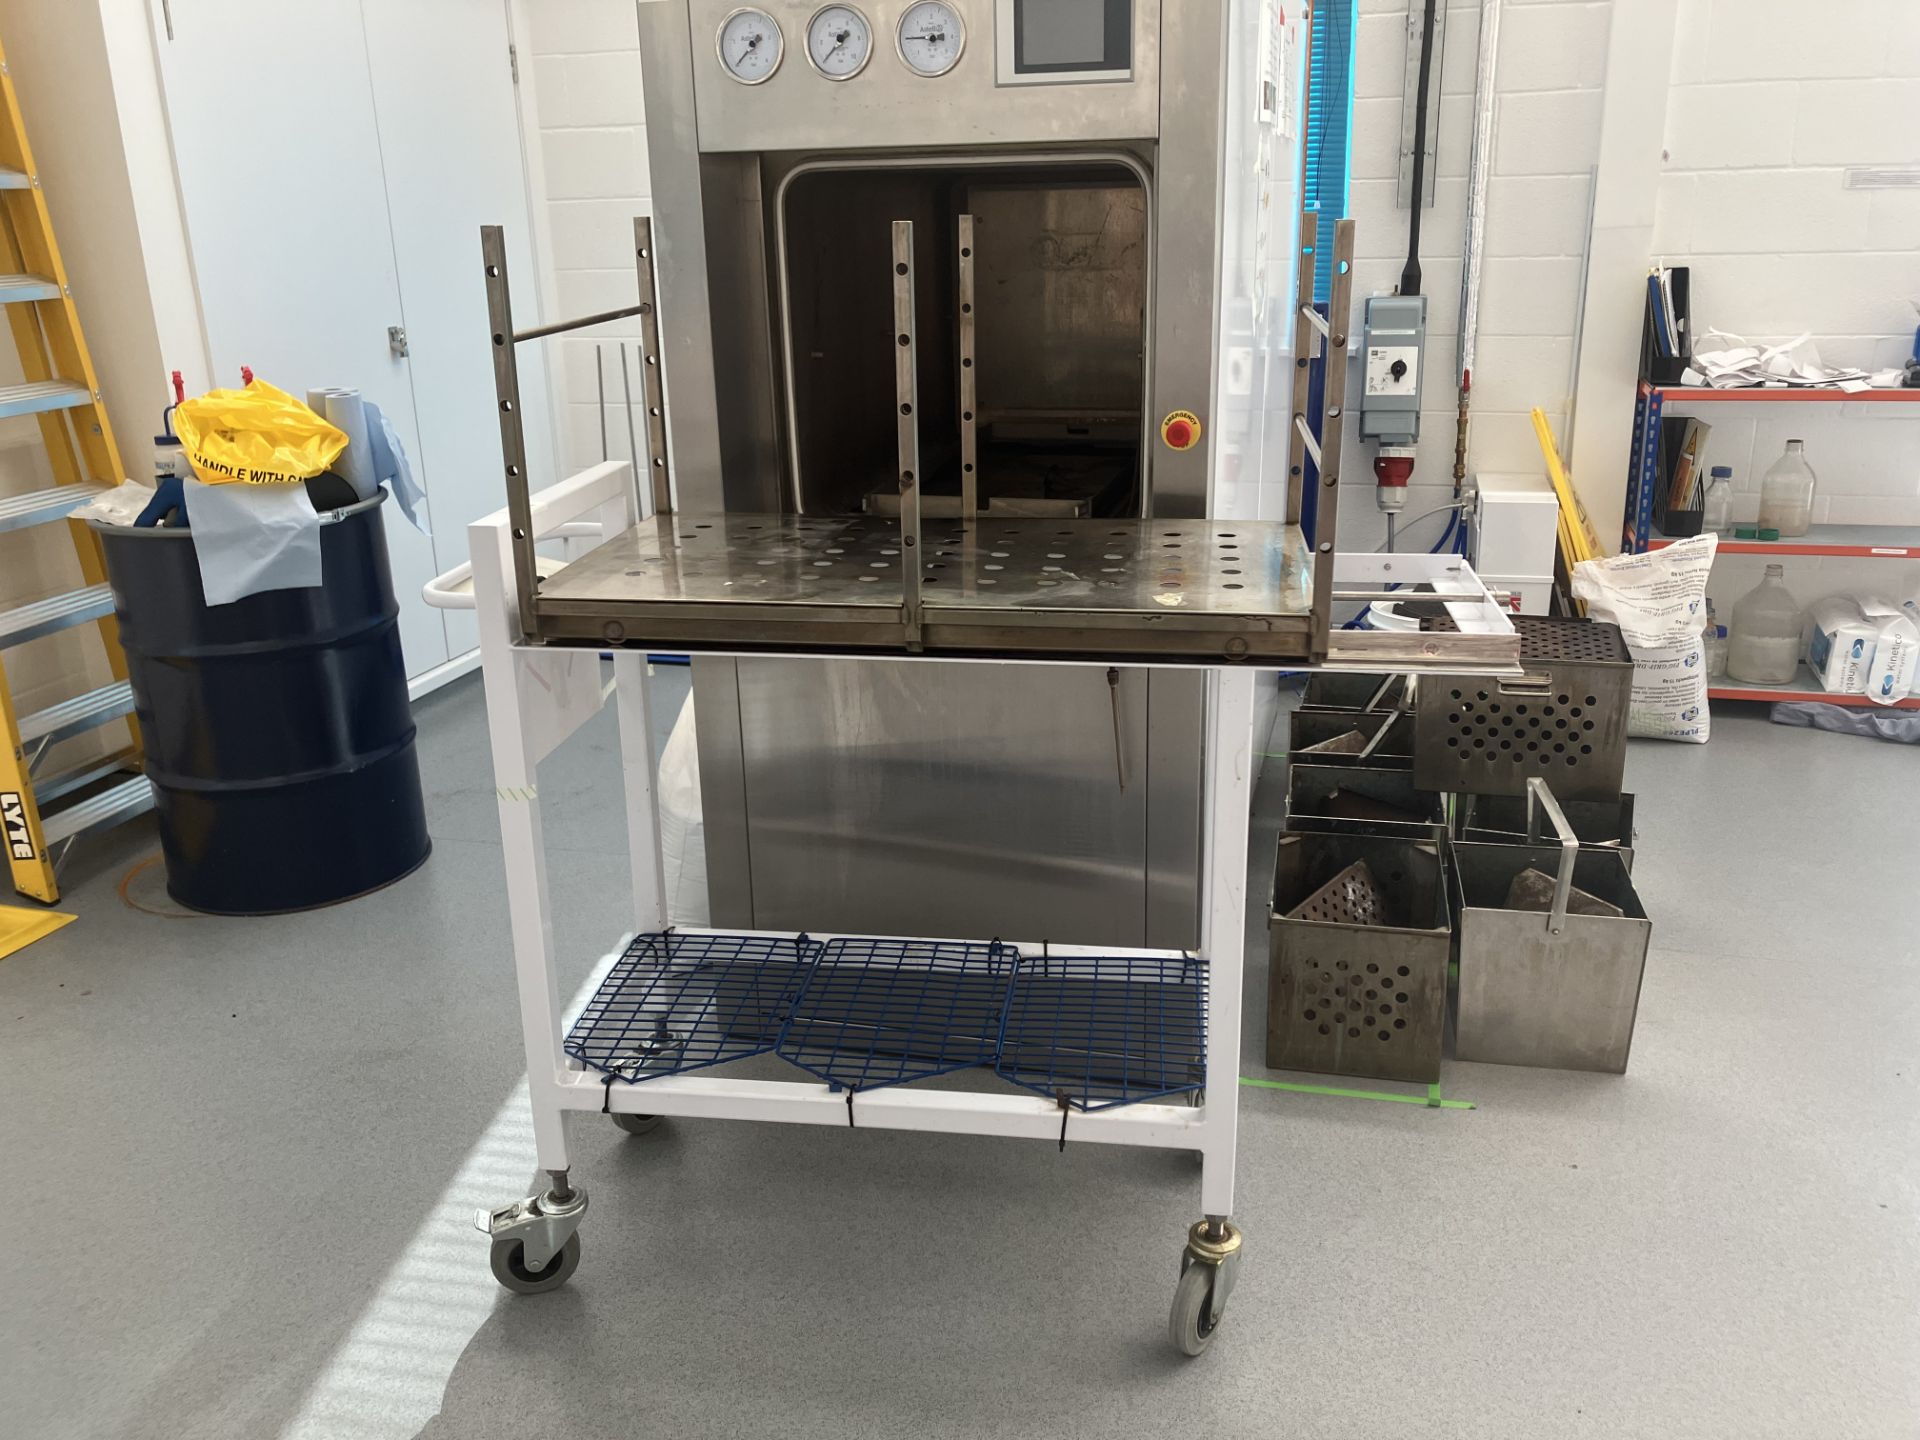 Astell autoclave type AVS360GSP17251 Serial no. PDN40437 (2016) with bespoke steel frame trolley, - Image 9 of 11